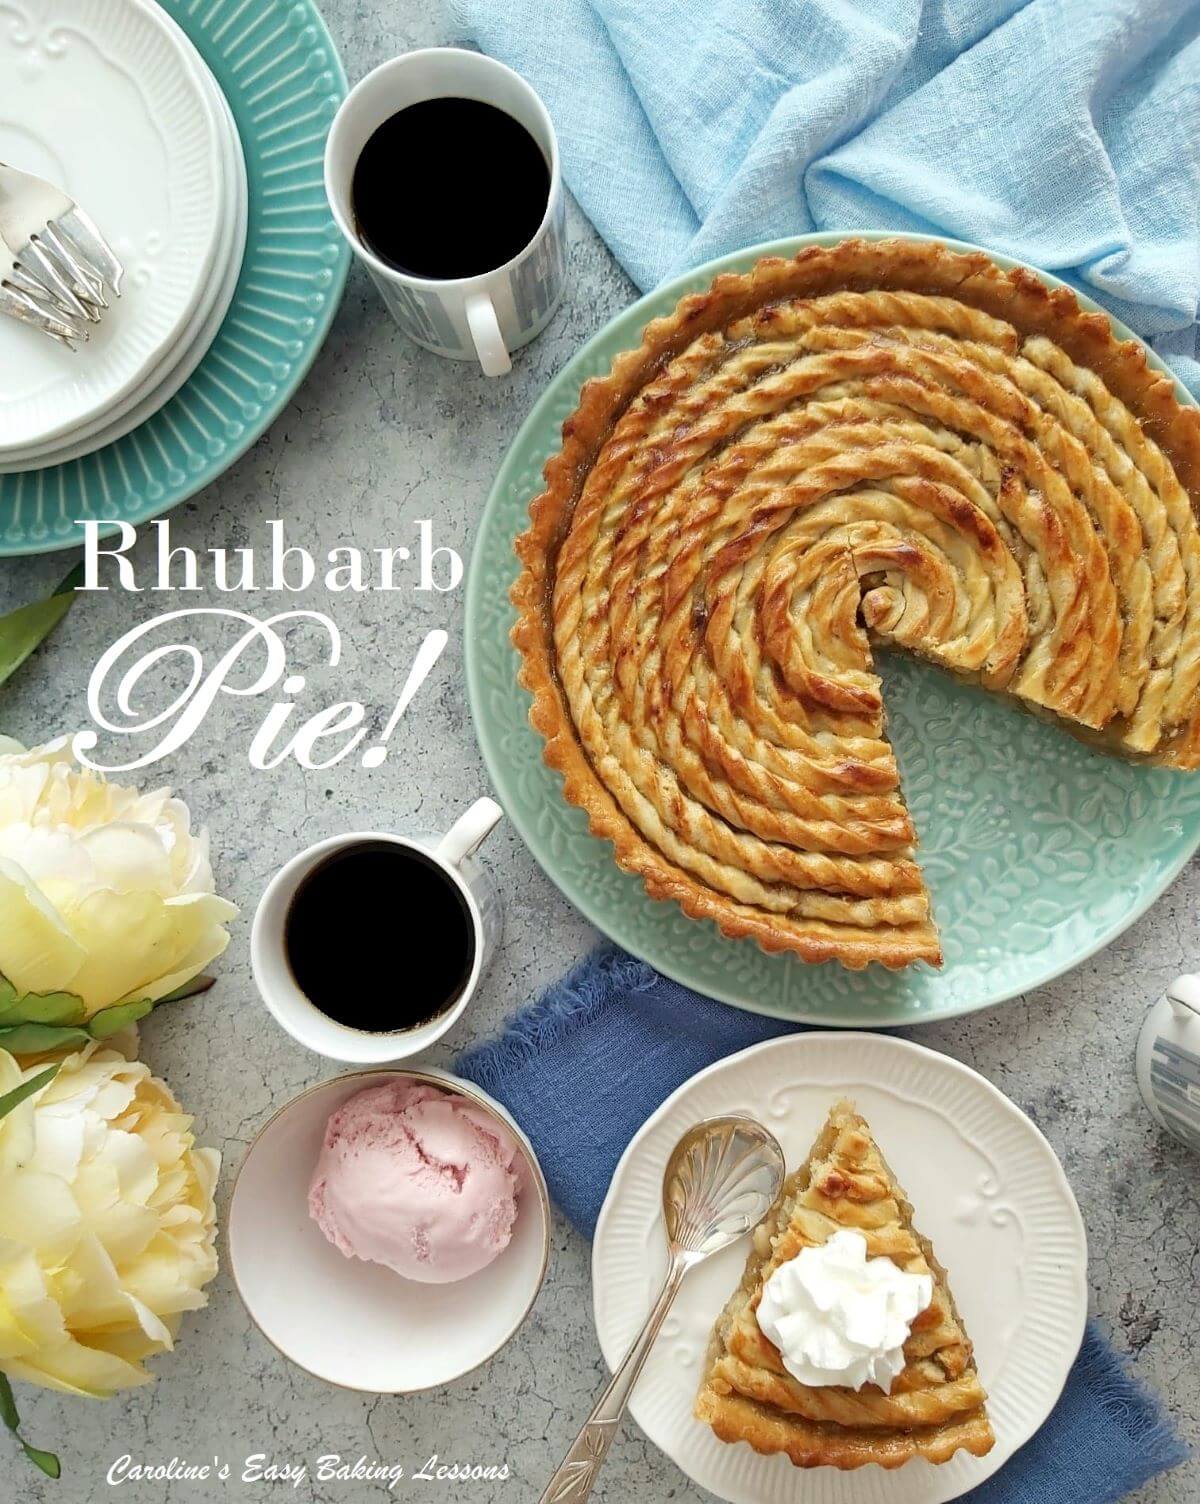 Rhubarb pie and spiral top crust on table with a slice served with cream and icecream and coffe and titled.